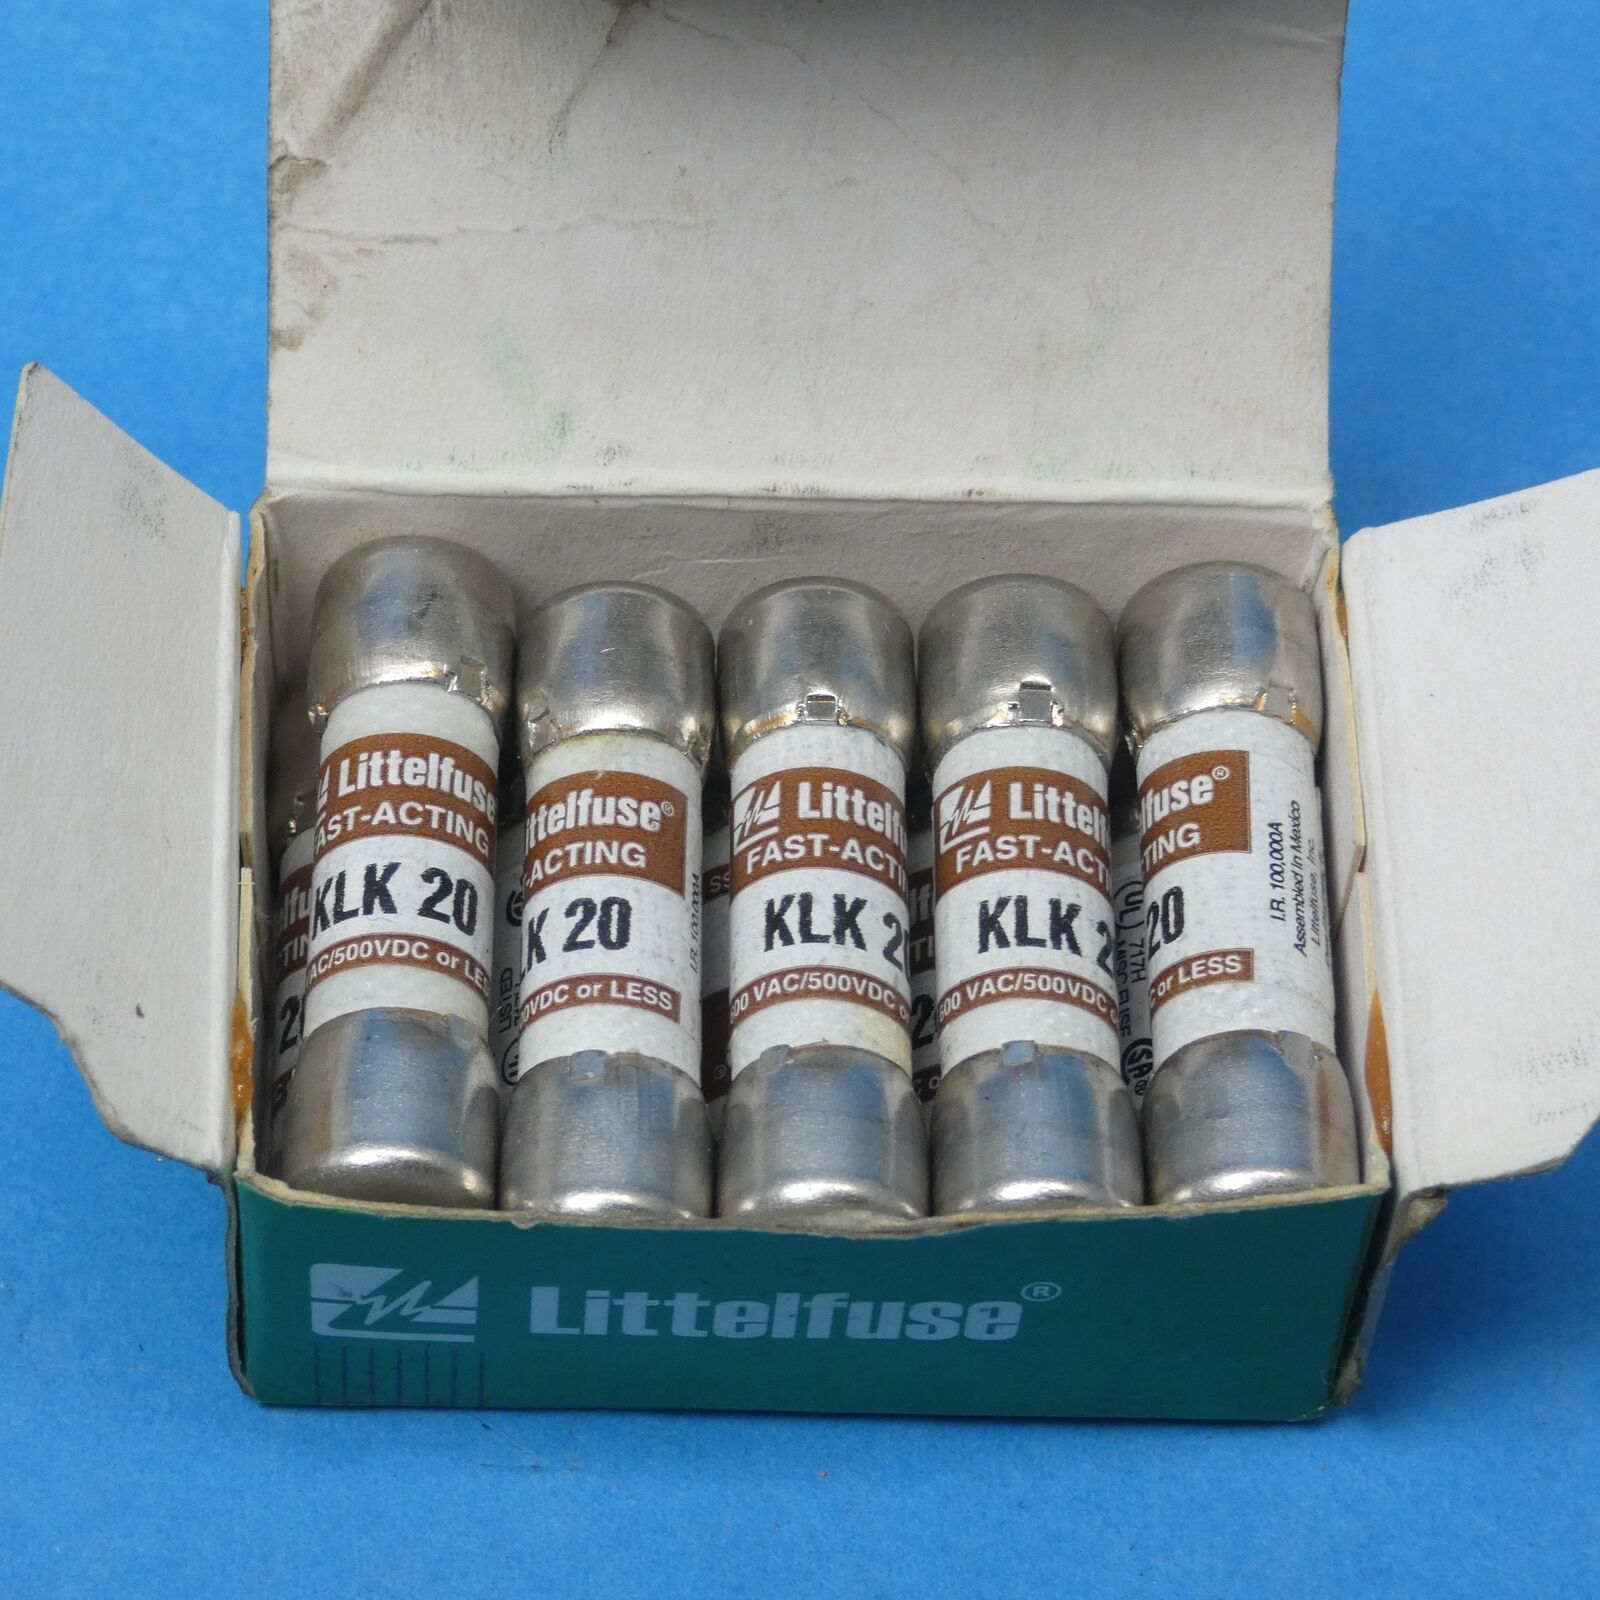 Bussmann KTK-20 Fast-acting Fuse Class and 50 similar items